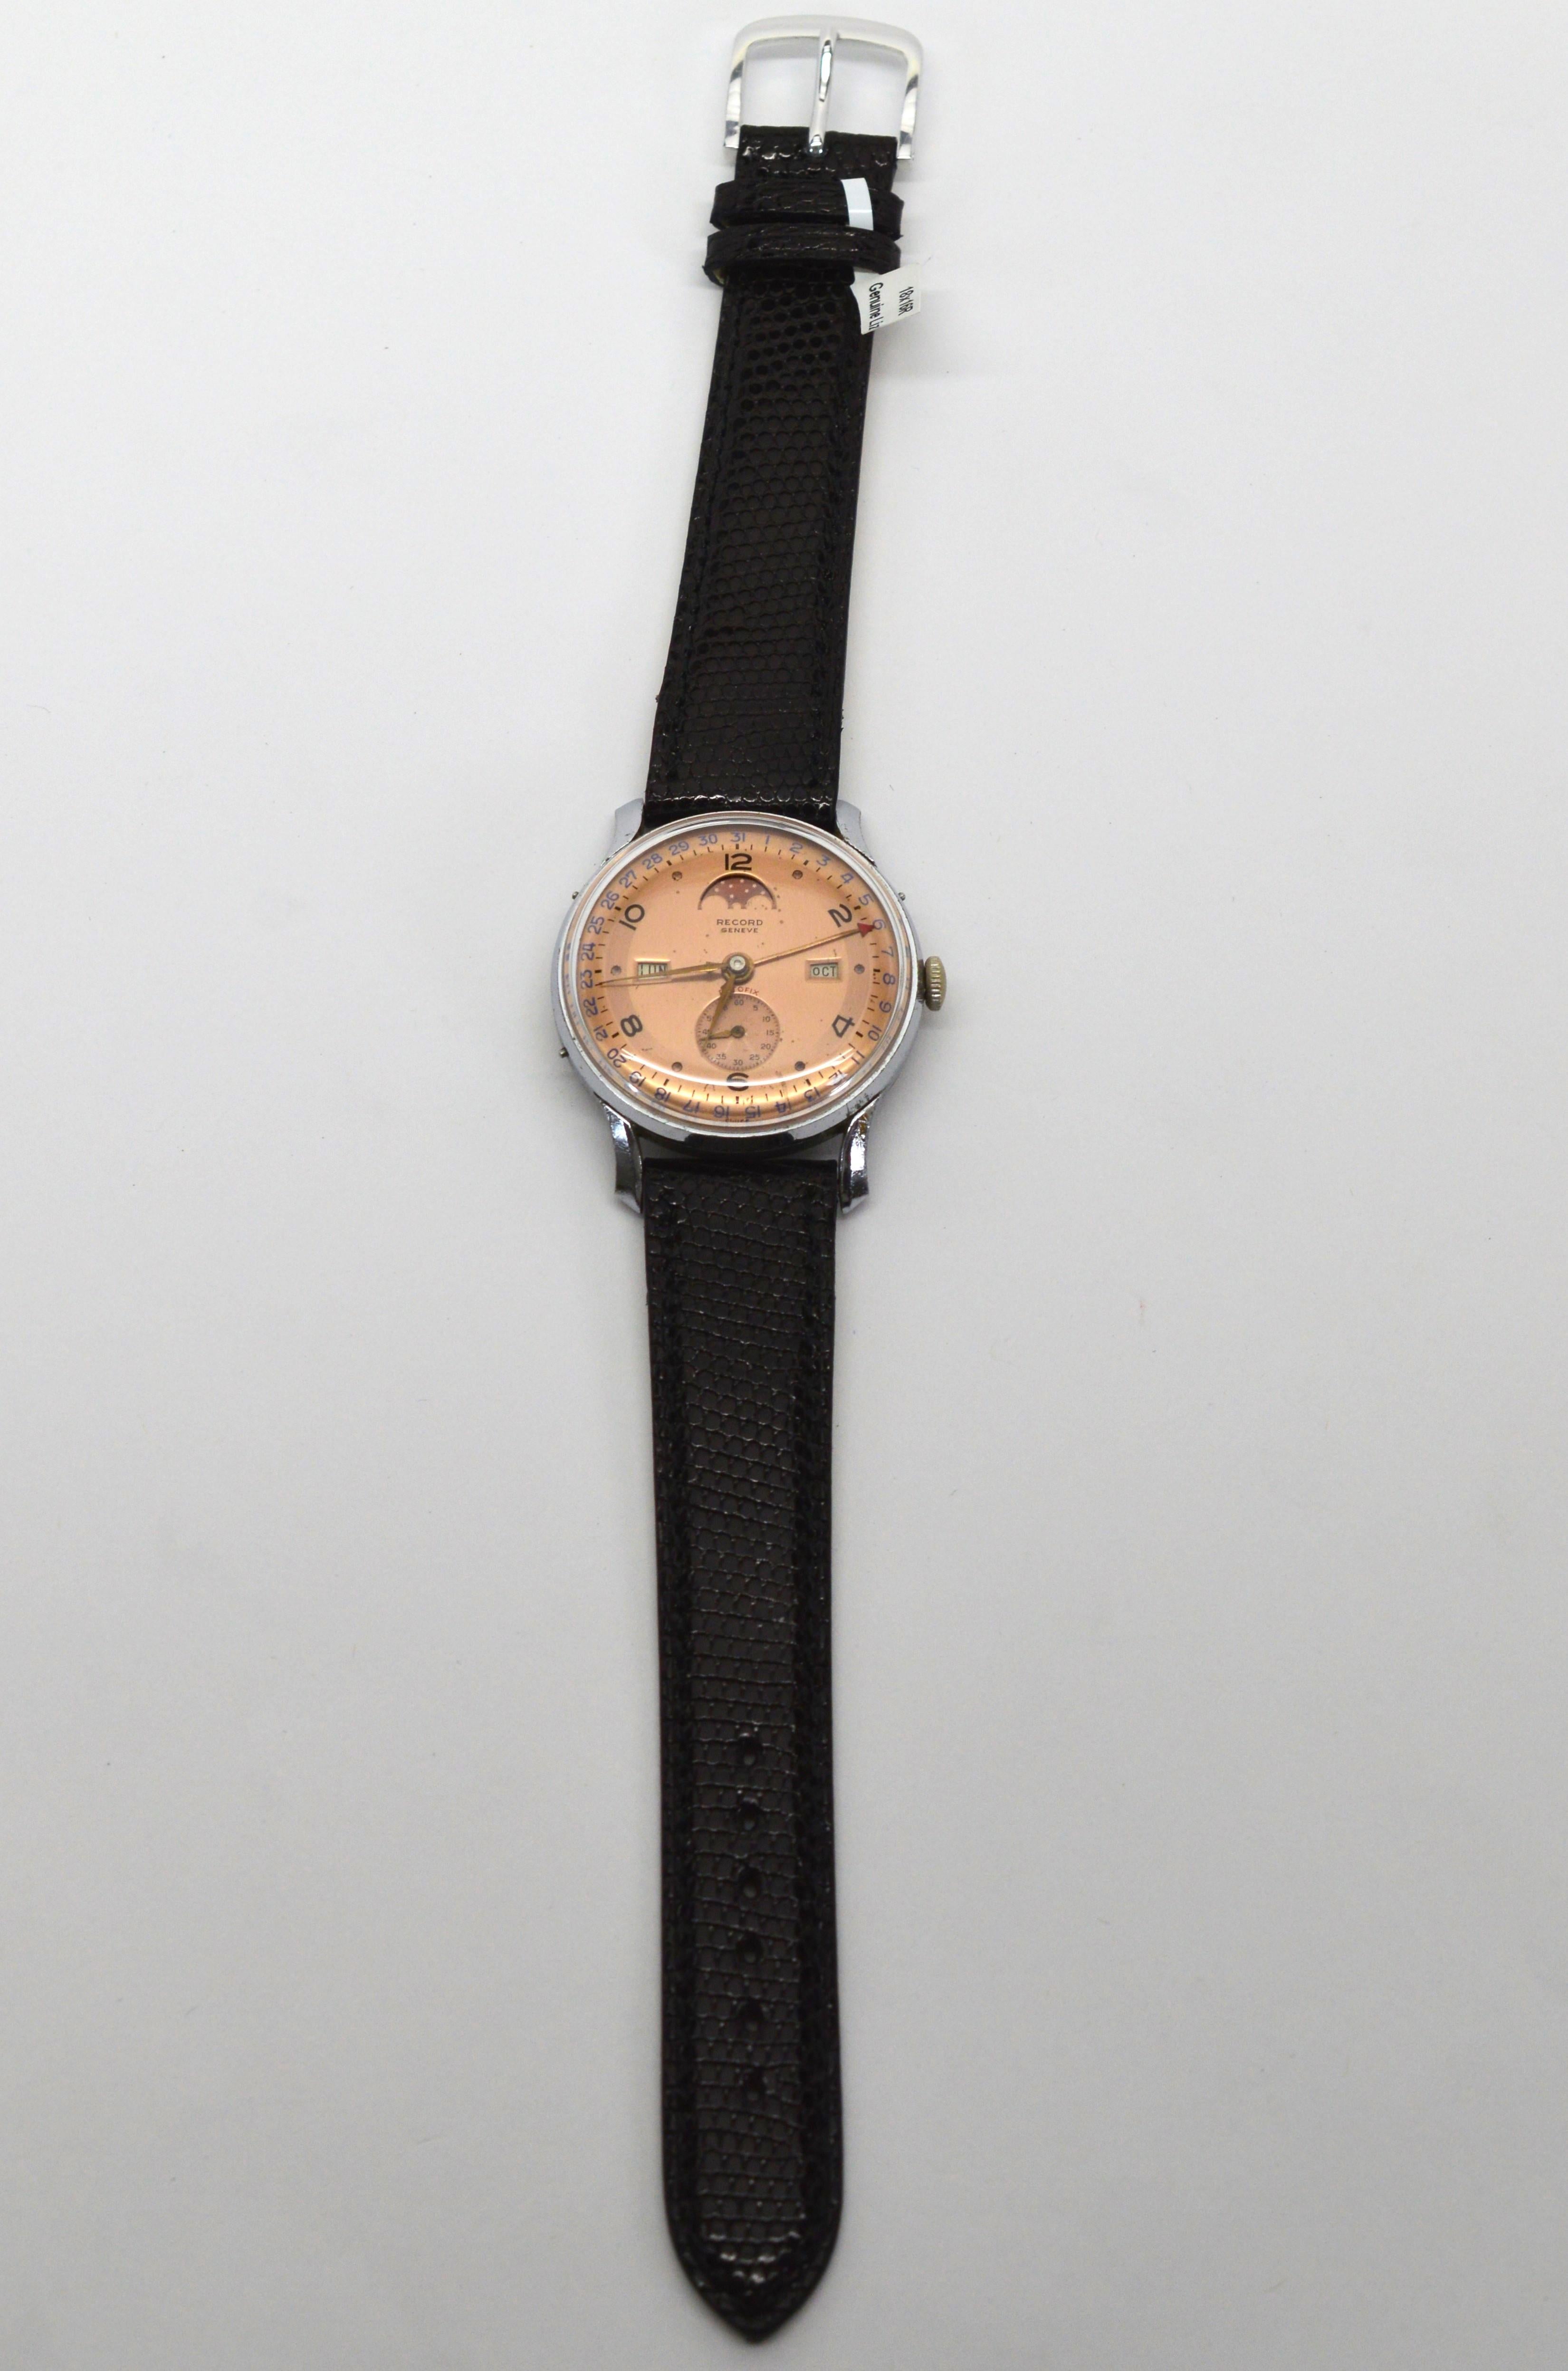 Vintage Record Watch Co. Moonphase Wrist Watch In Good Condition For Sale In Mount Kisco, NY